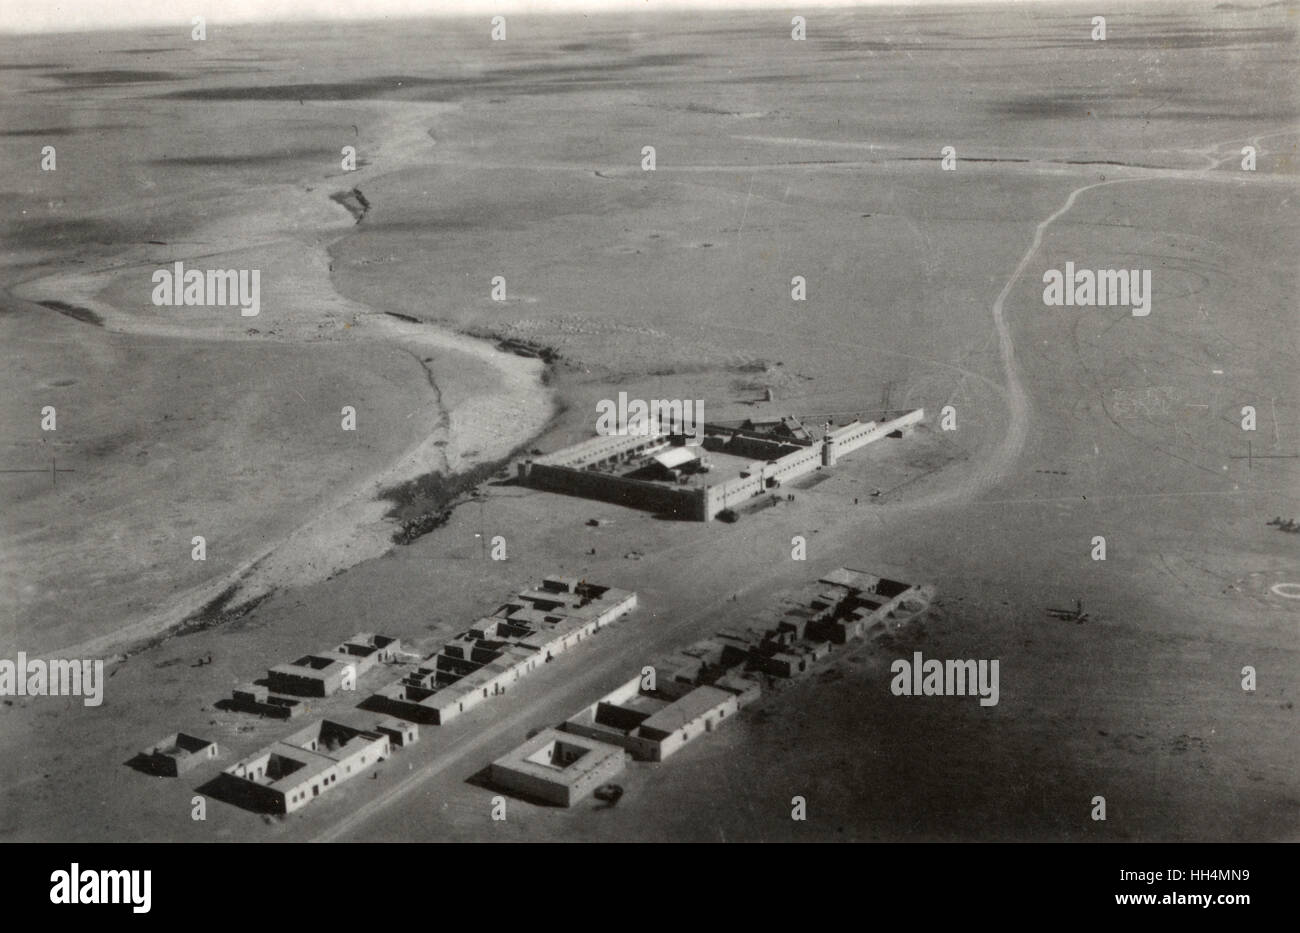 Aerial view of Fort Rutbah Wells, British Petroleum, Western Iraq. Also visible is Rutbah village and an airstrip for Imperial Airways and Nairn Transport Co. Stock Photo